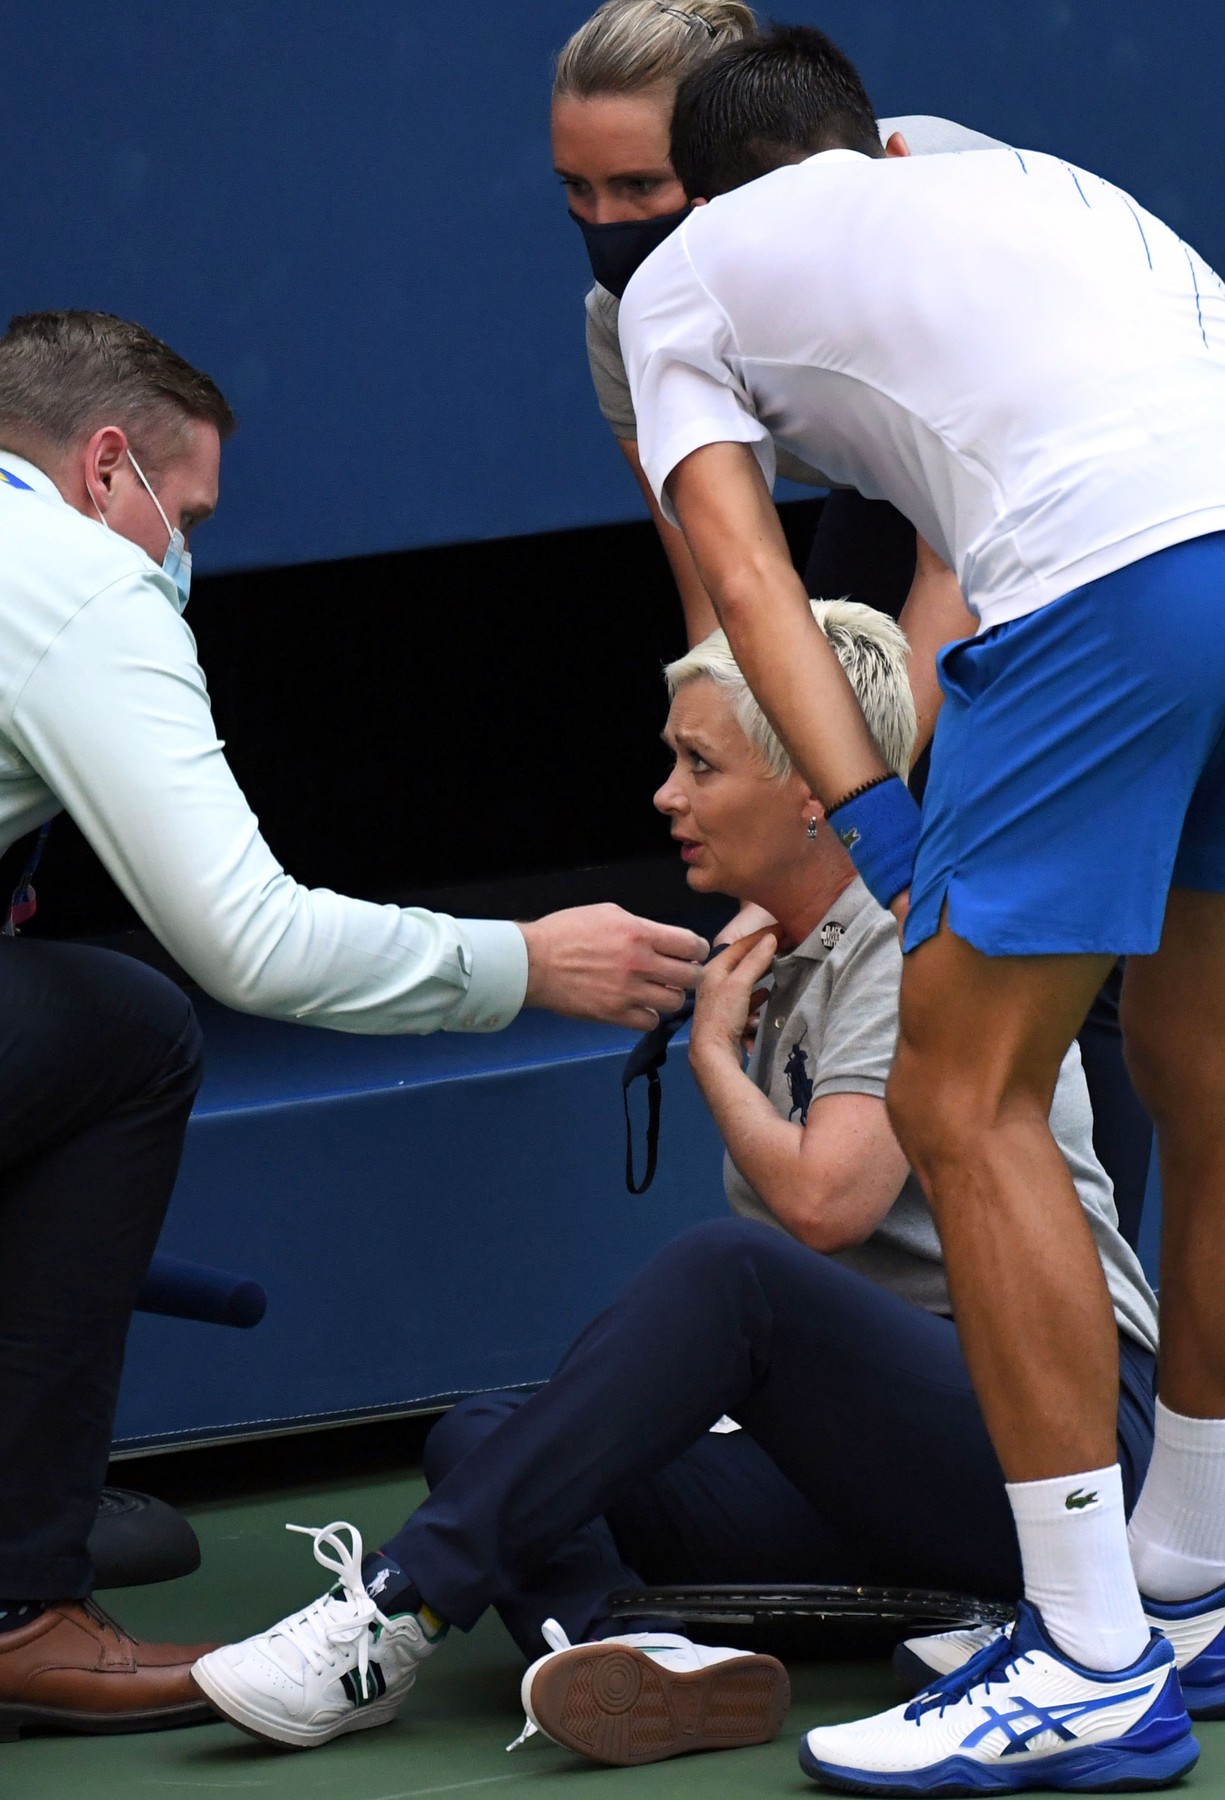 Sep 6, 2020; Flushing Meadows, New York, USA; Medical staff and Novak Djokovic of Serbia check on a line judge after she was hit in the throat by a ball hit by Djokovic after he lost a game to Pablo Carreno Busta of Spain (not pictured) in the first set on day seven of the 2020 U.S. Open tennis tournament at USTA Billie Jean King National Tennis Center.,Image: 556572203, License: Rights-managed, Restrictions: *** World Rights ***, Model Release: no, Credit line: USA TODAY Network / ddp USA / Profimedia